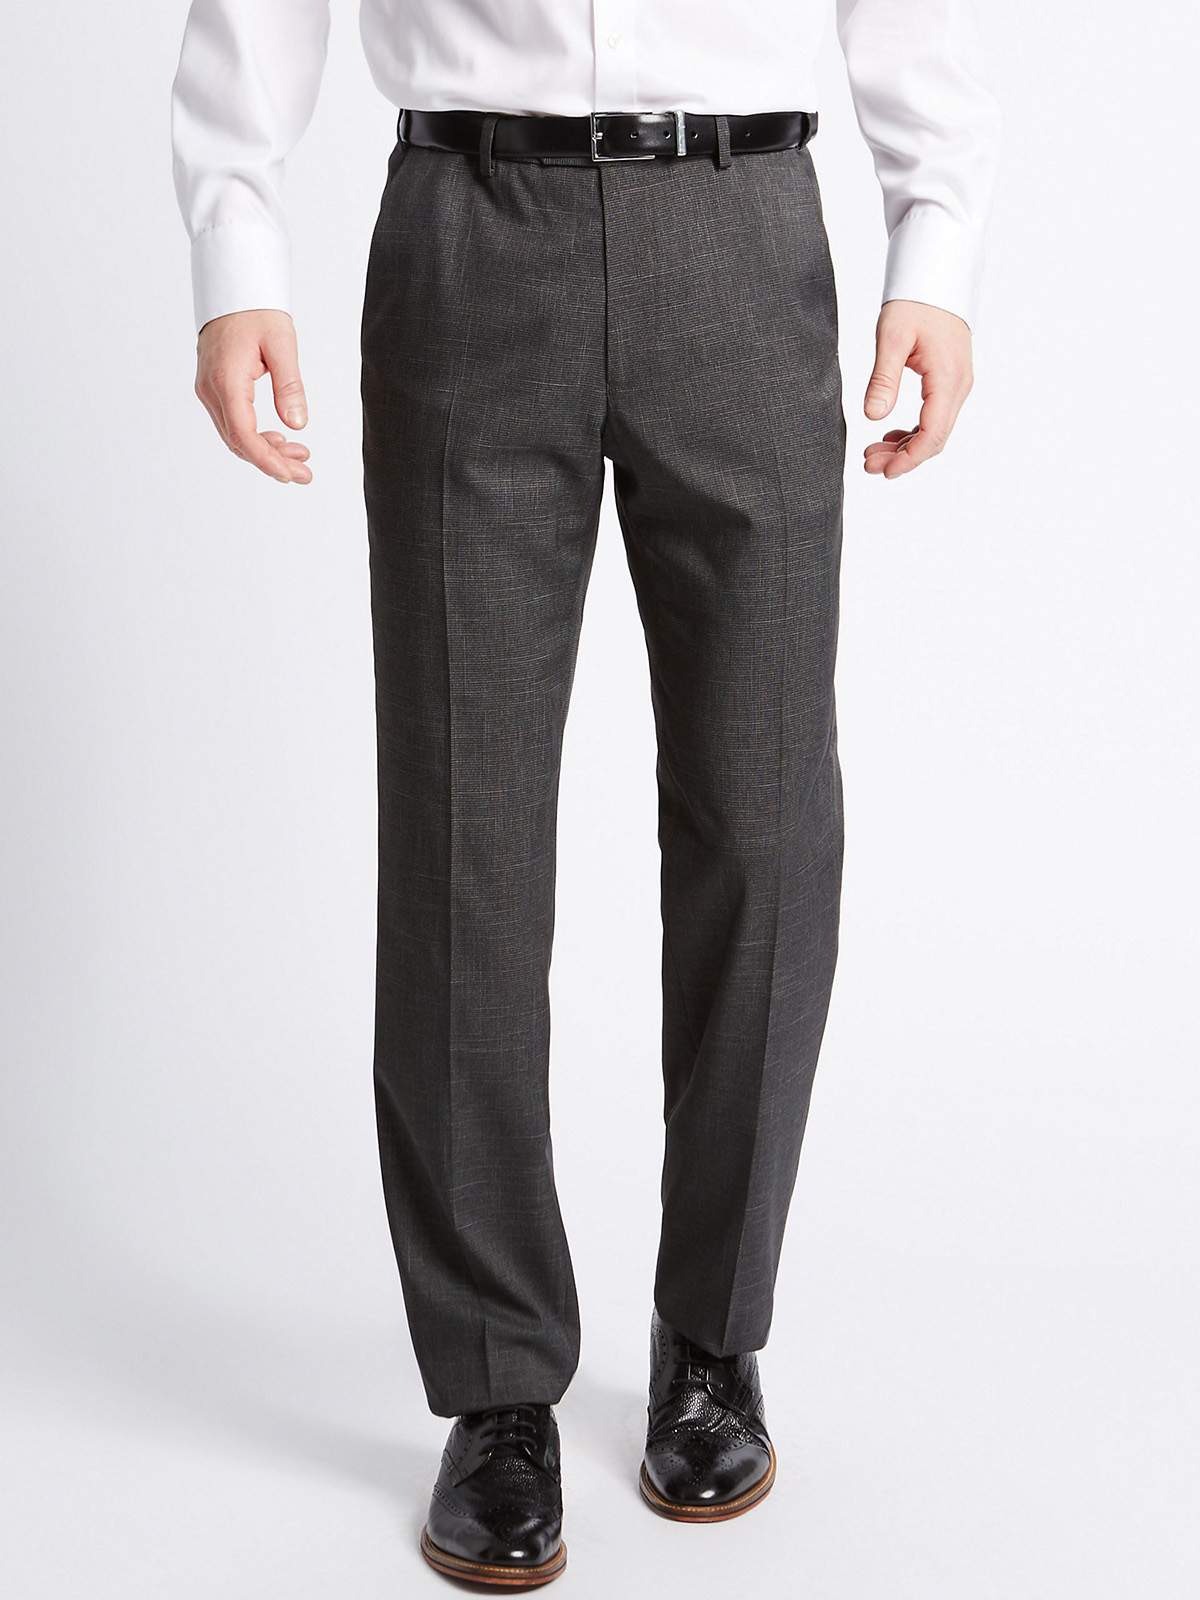 Marks and Spencer - - M&5 CHARCOAL Mens Tailored Fit Textured Flat ...